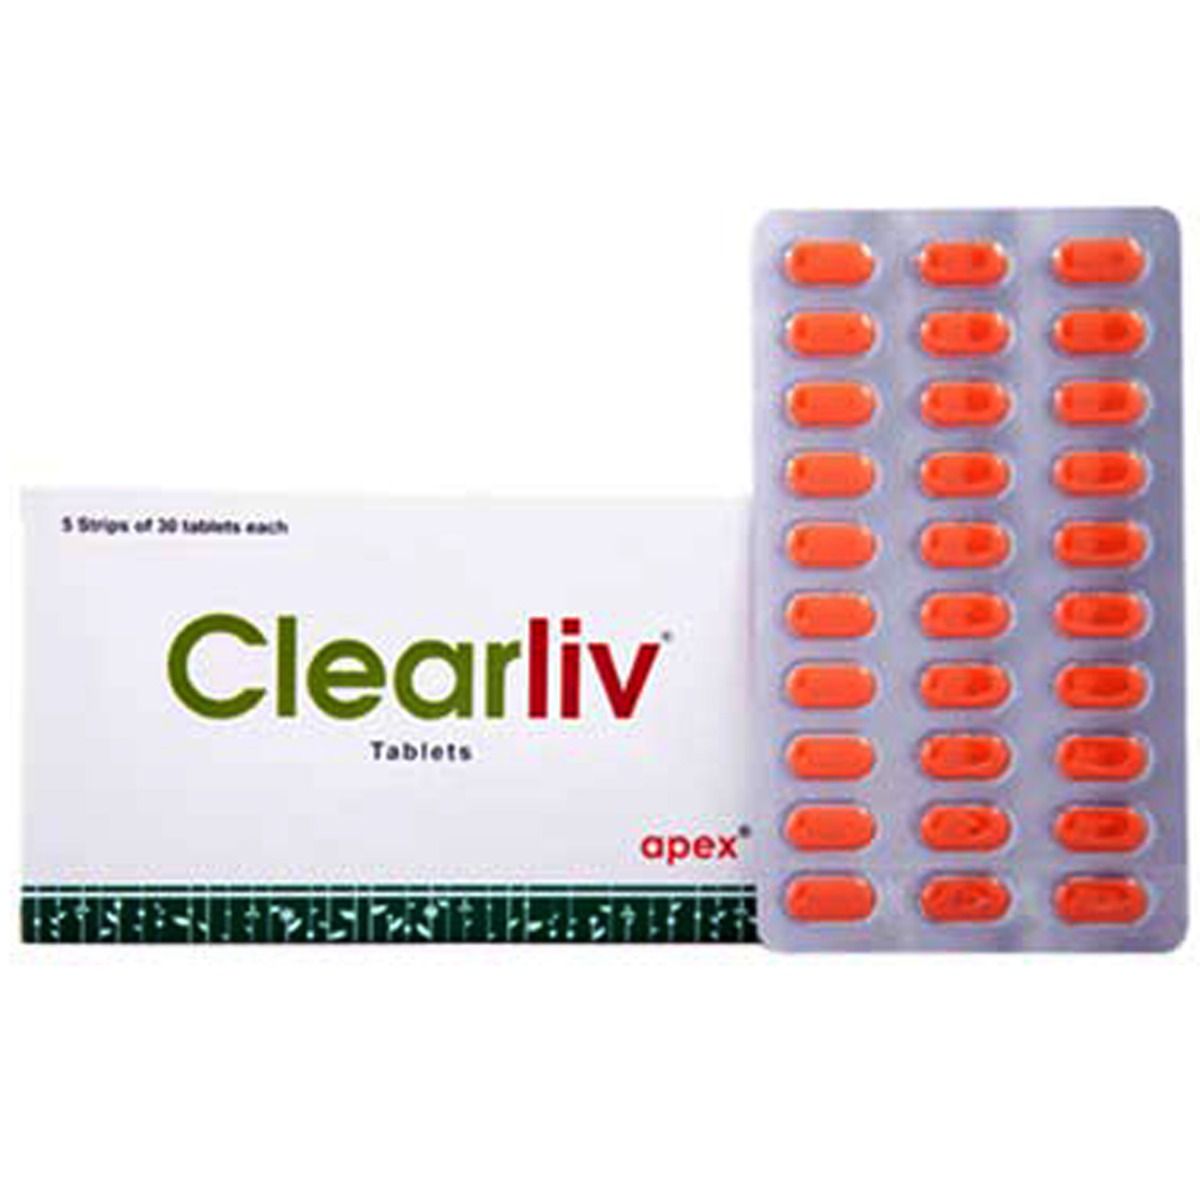 Clearliv, 30 Tablets, Pack of 1 